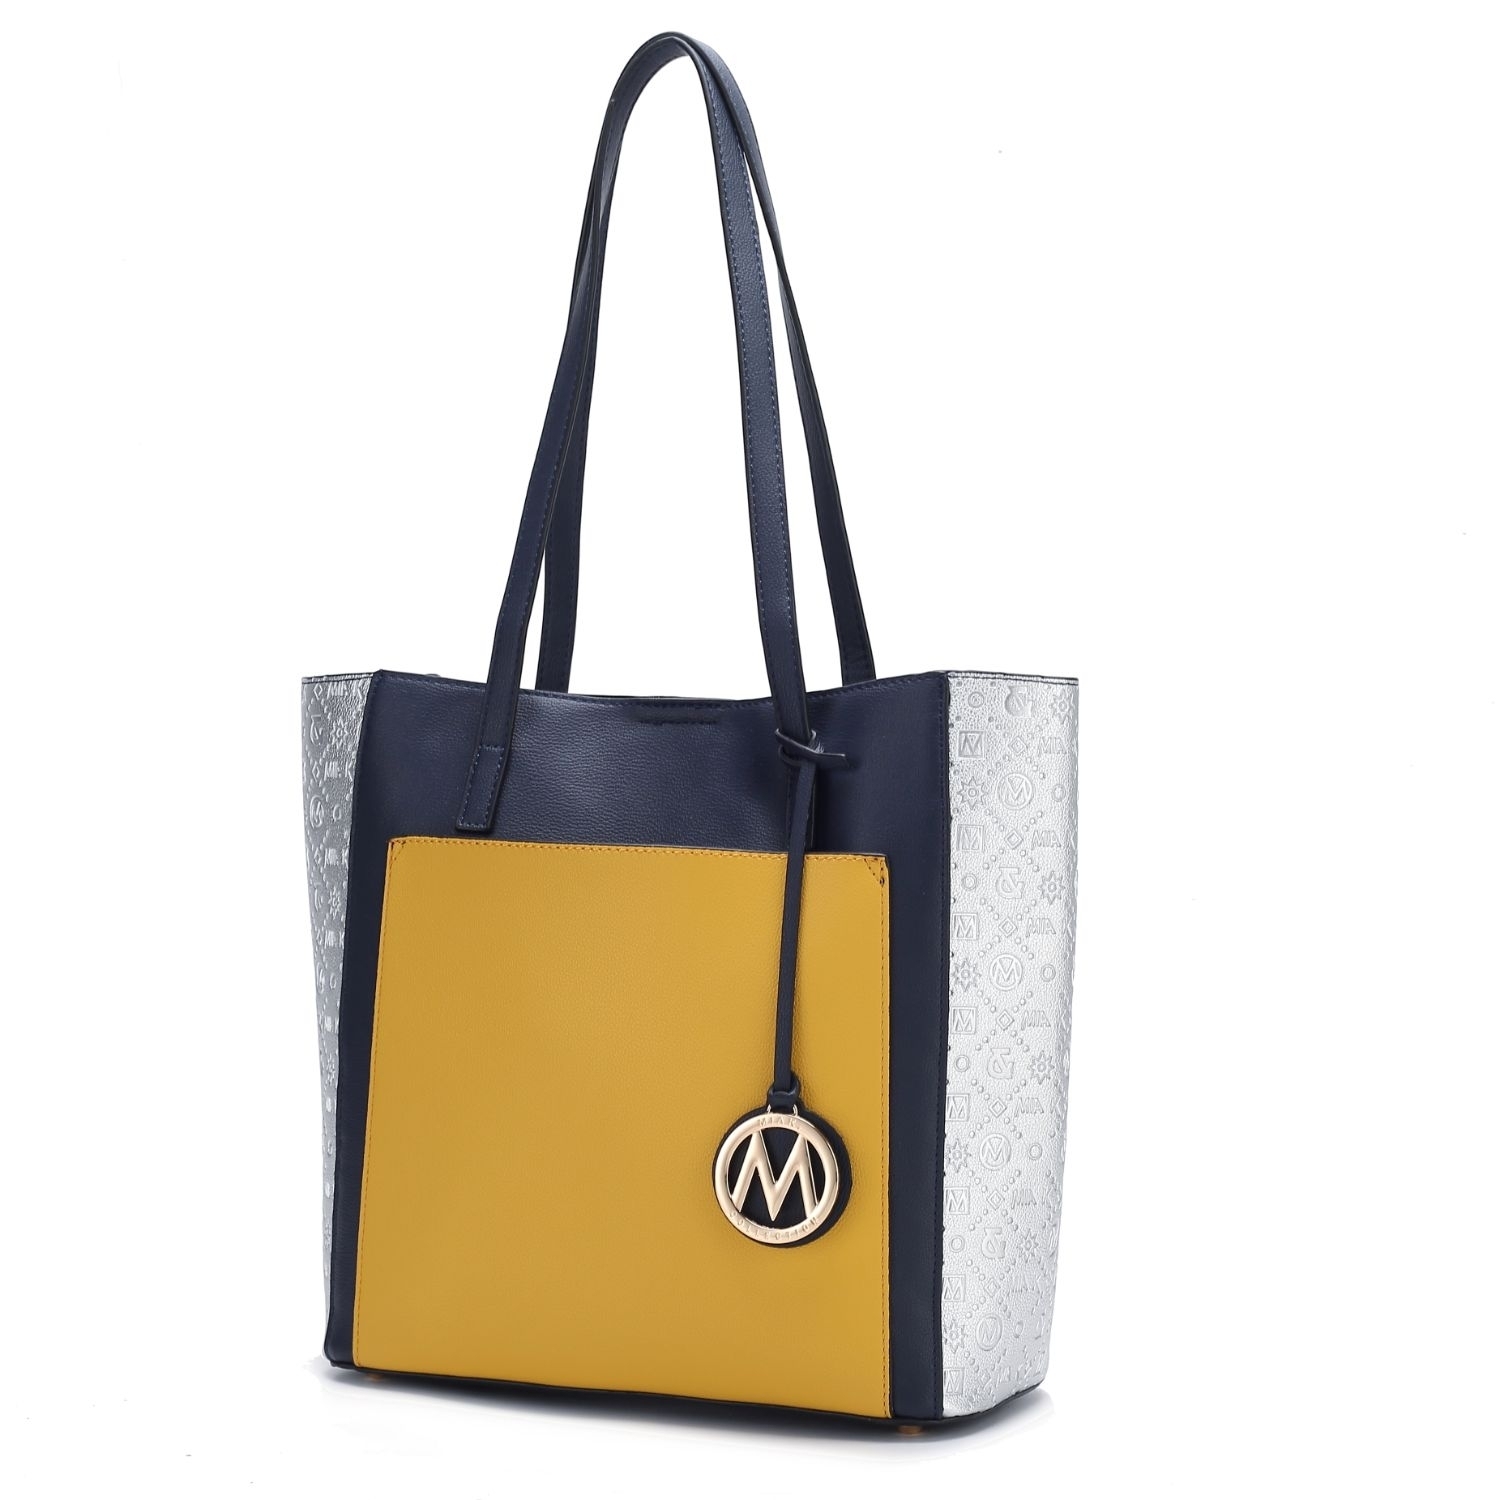 MKF Collection Leah Vegan Leather Color-block Women's Tote Bag By Mia K - Mustard